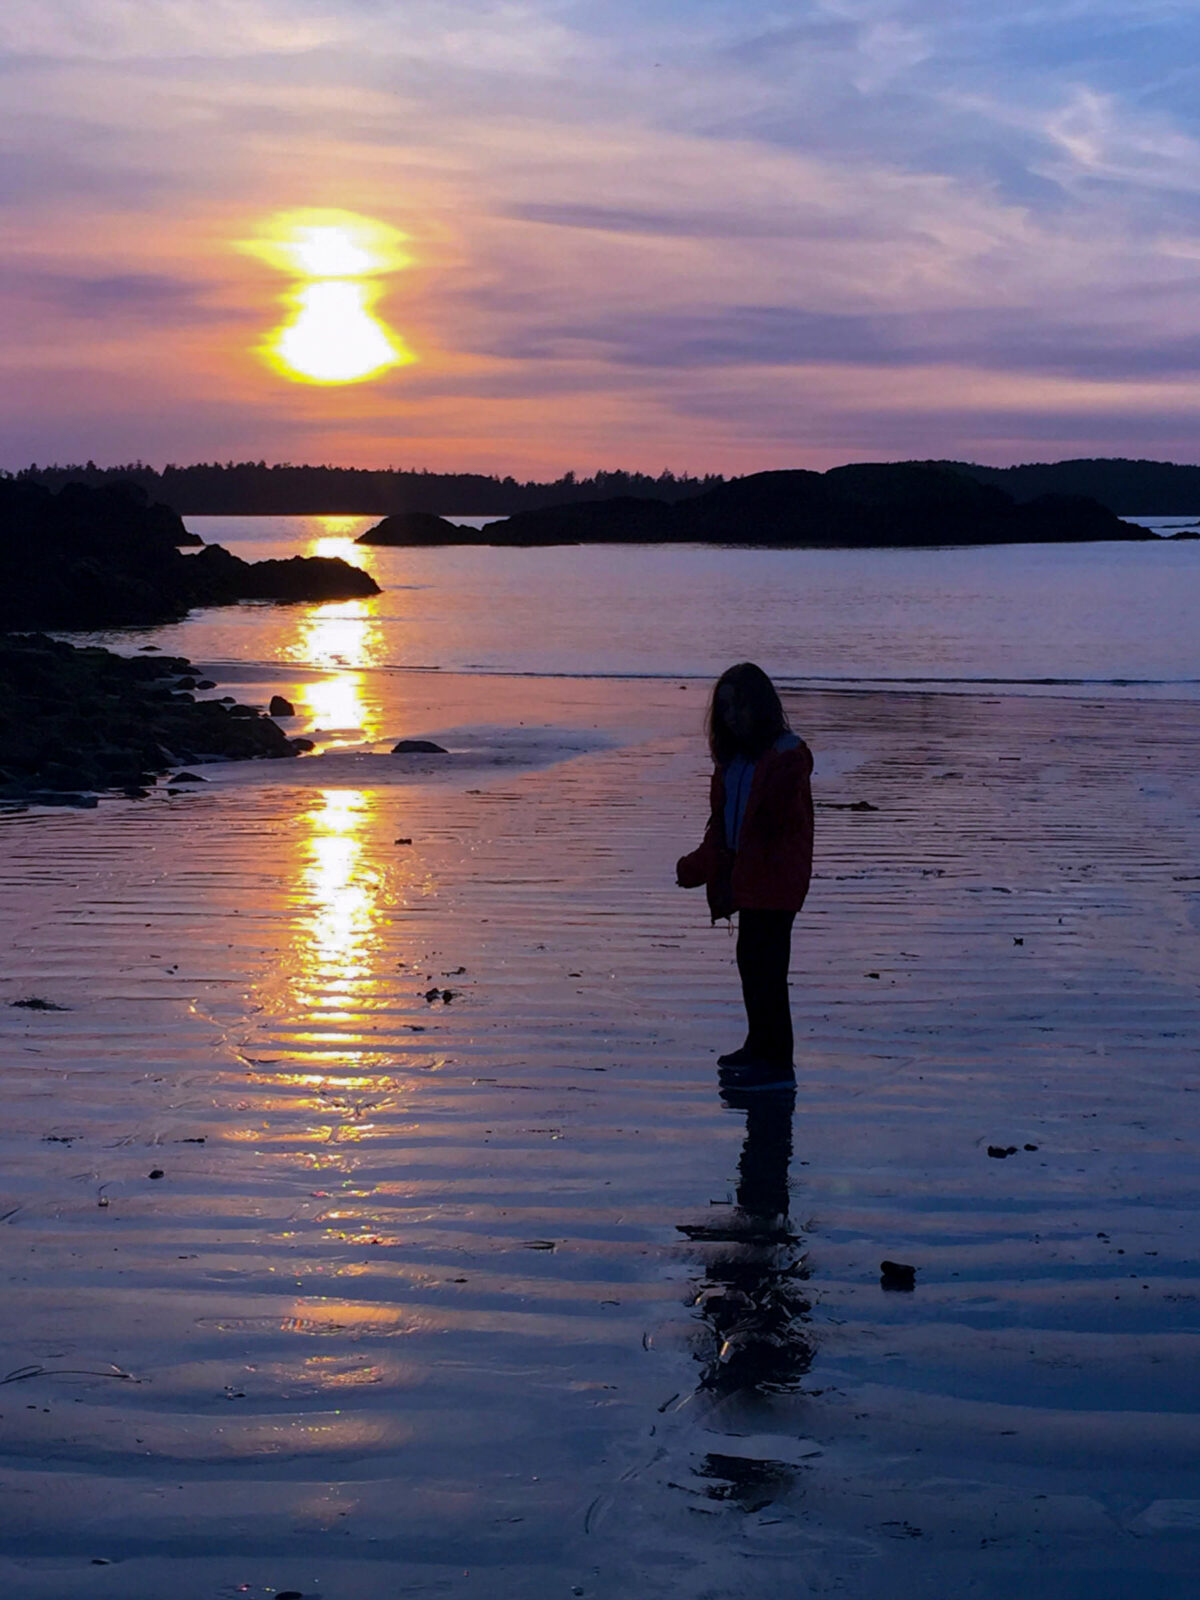 Tofino, the beach at sunset with a silhouette of our daughter.